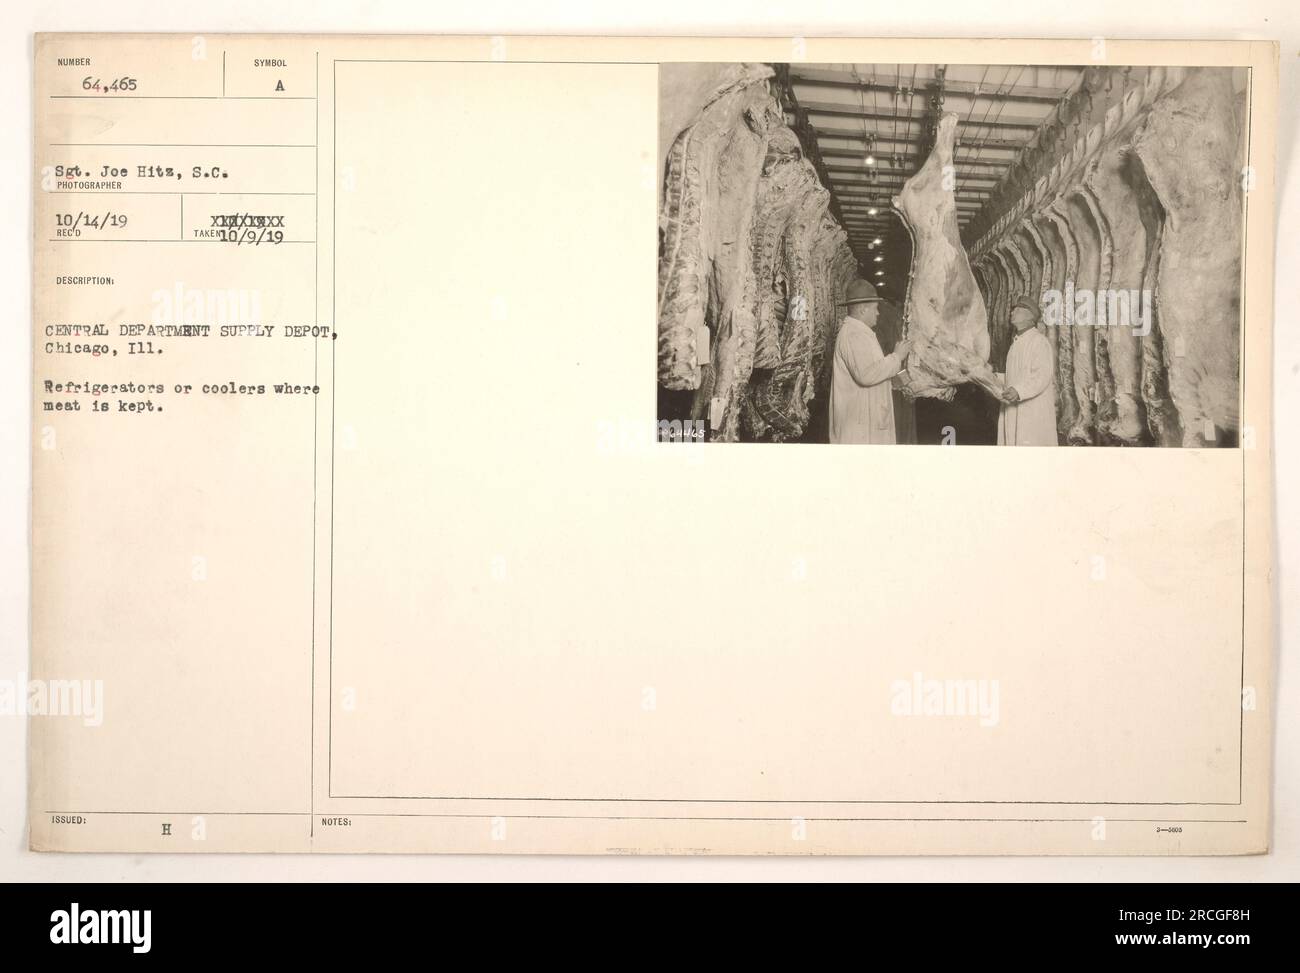 Refrigerators or coolers at the Central Department Supply Depot in Chicago, Illinois are used to store meat. This photograph was taken by Sergeant Joe Hits on October 14, 1919. The description symbol is 'A' and the photo was taken on October 9, 1919. The notes indicate that there are a total of 64,465 refrigerators for storing meat. Stock Photo